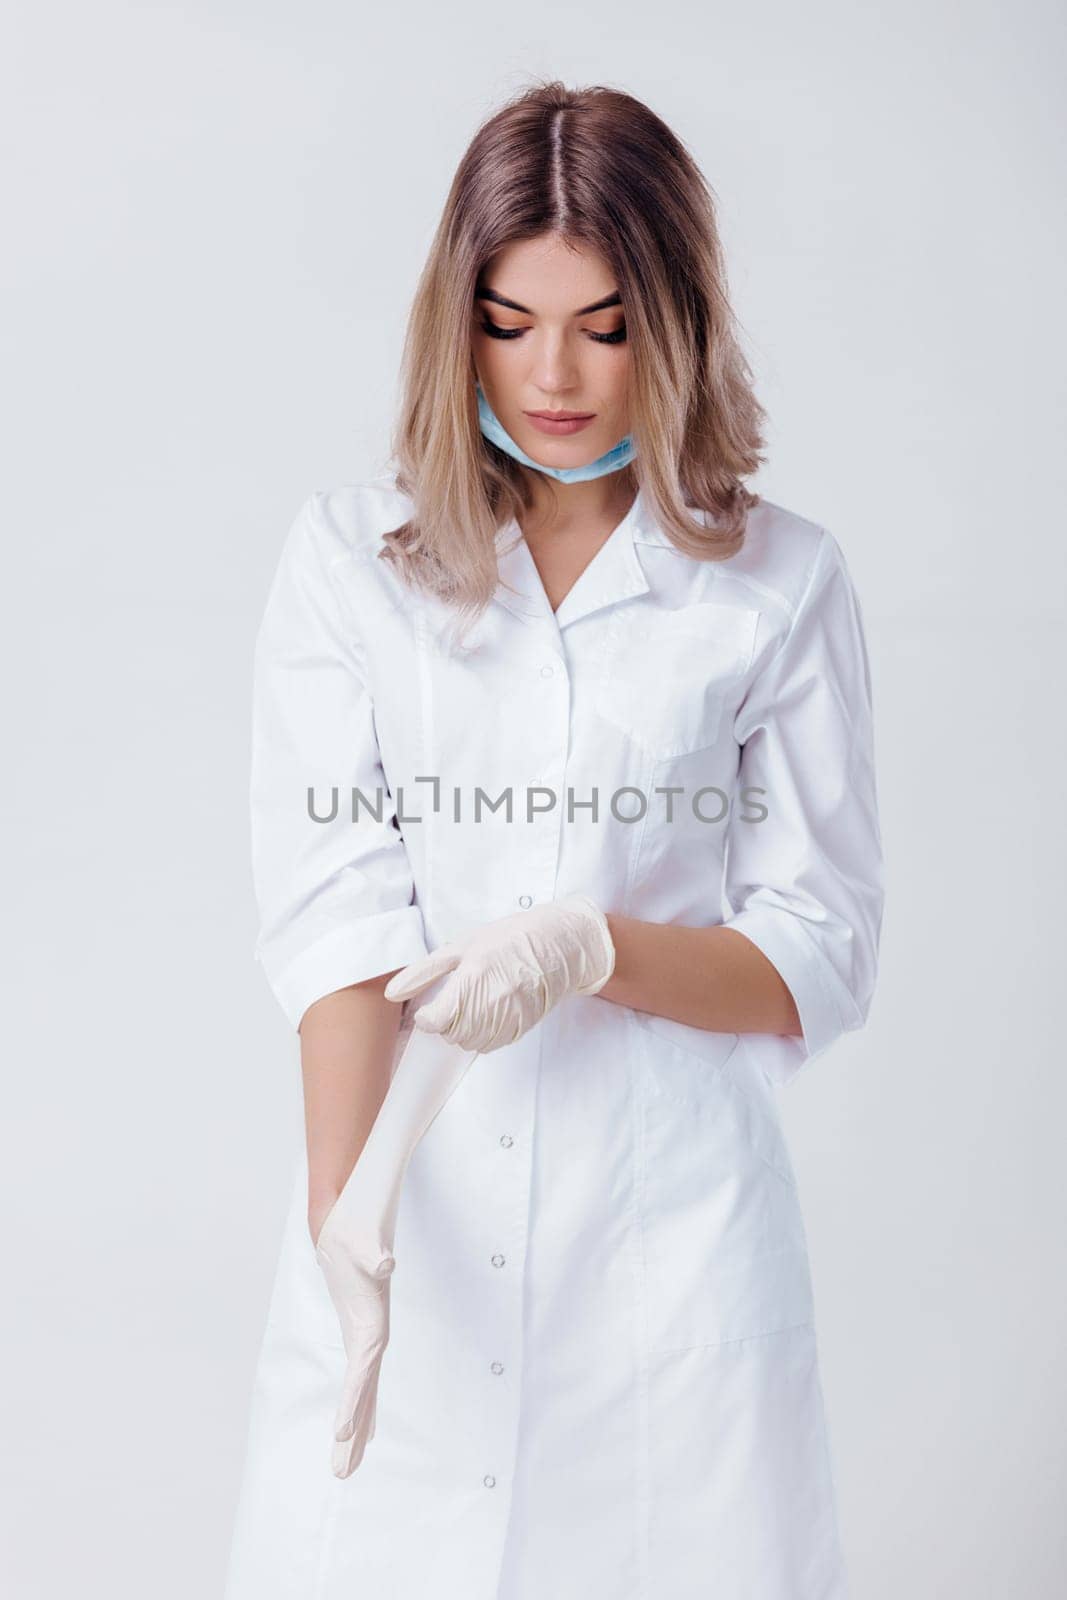 Portrait of woman doctor with face mask wearing white medical gloves